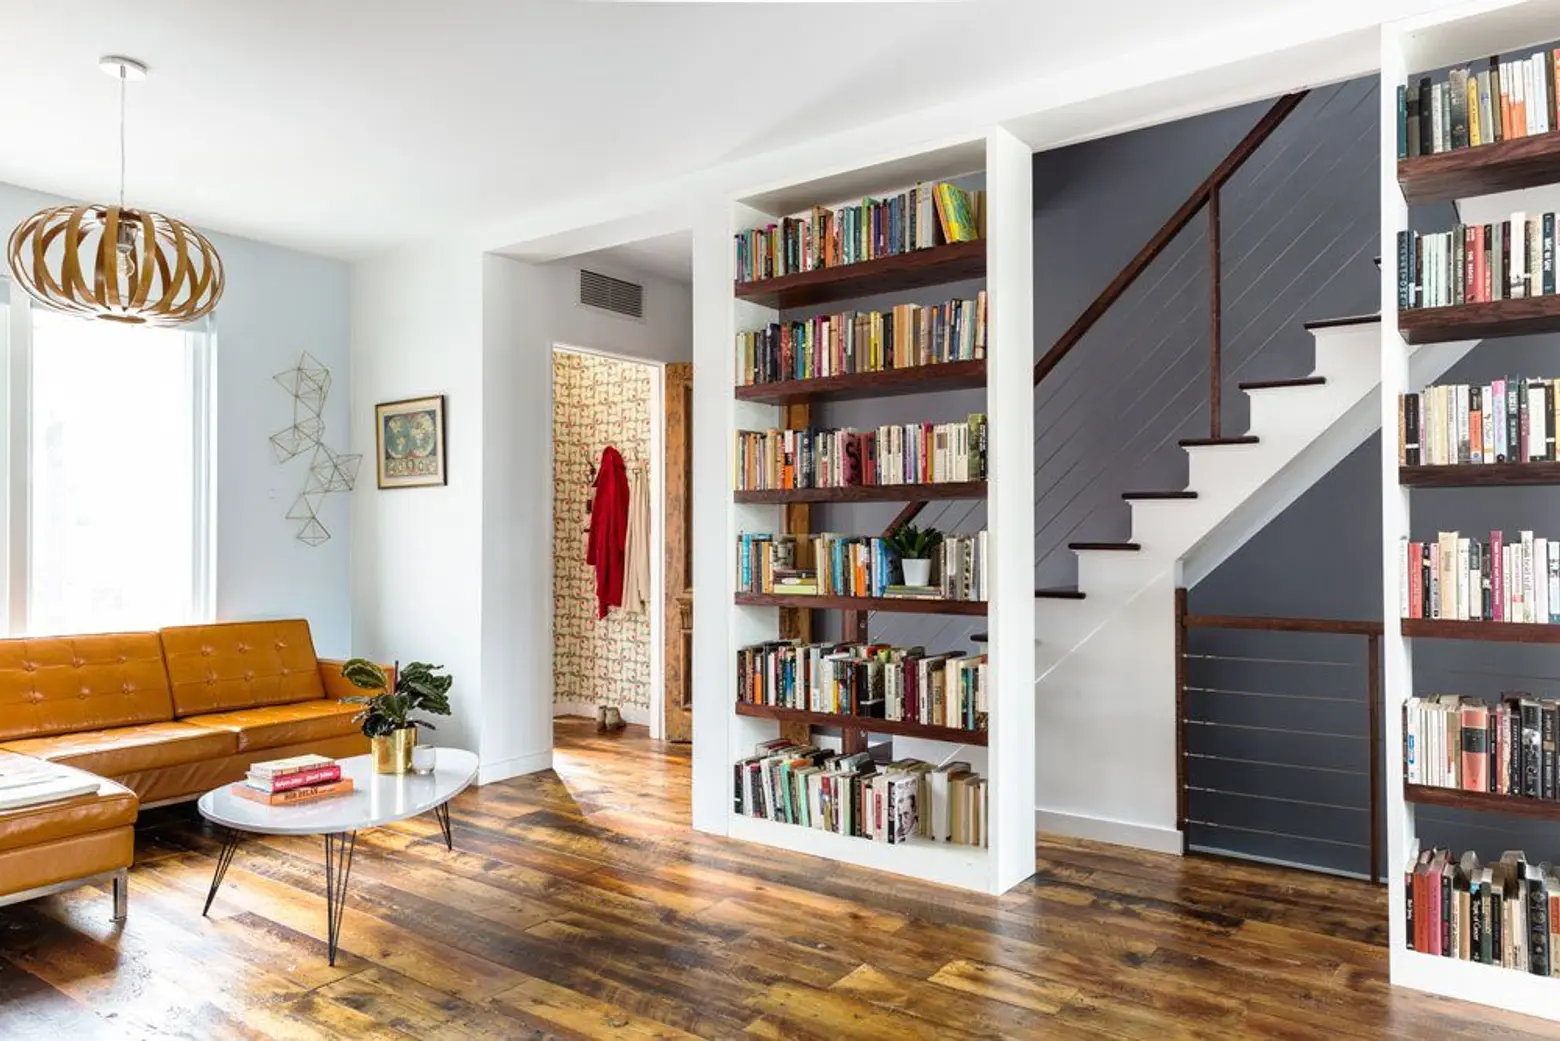 This Windsor Terrace townhouse reno by Barker Freeman was inspired by the owner’s love of books